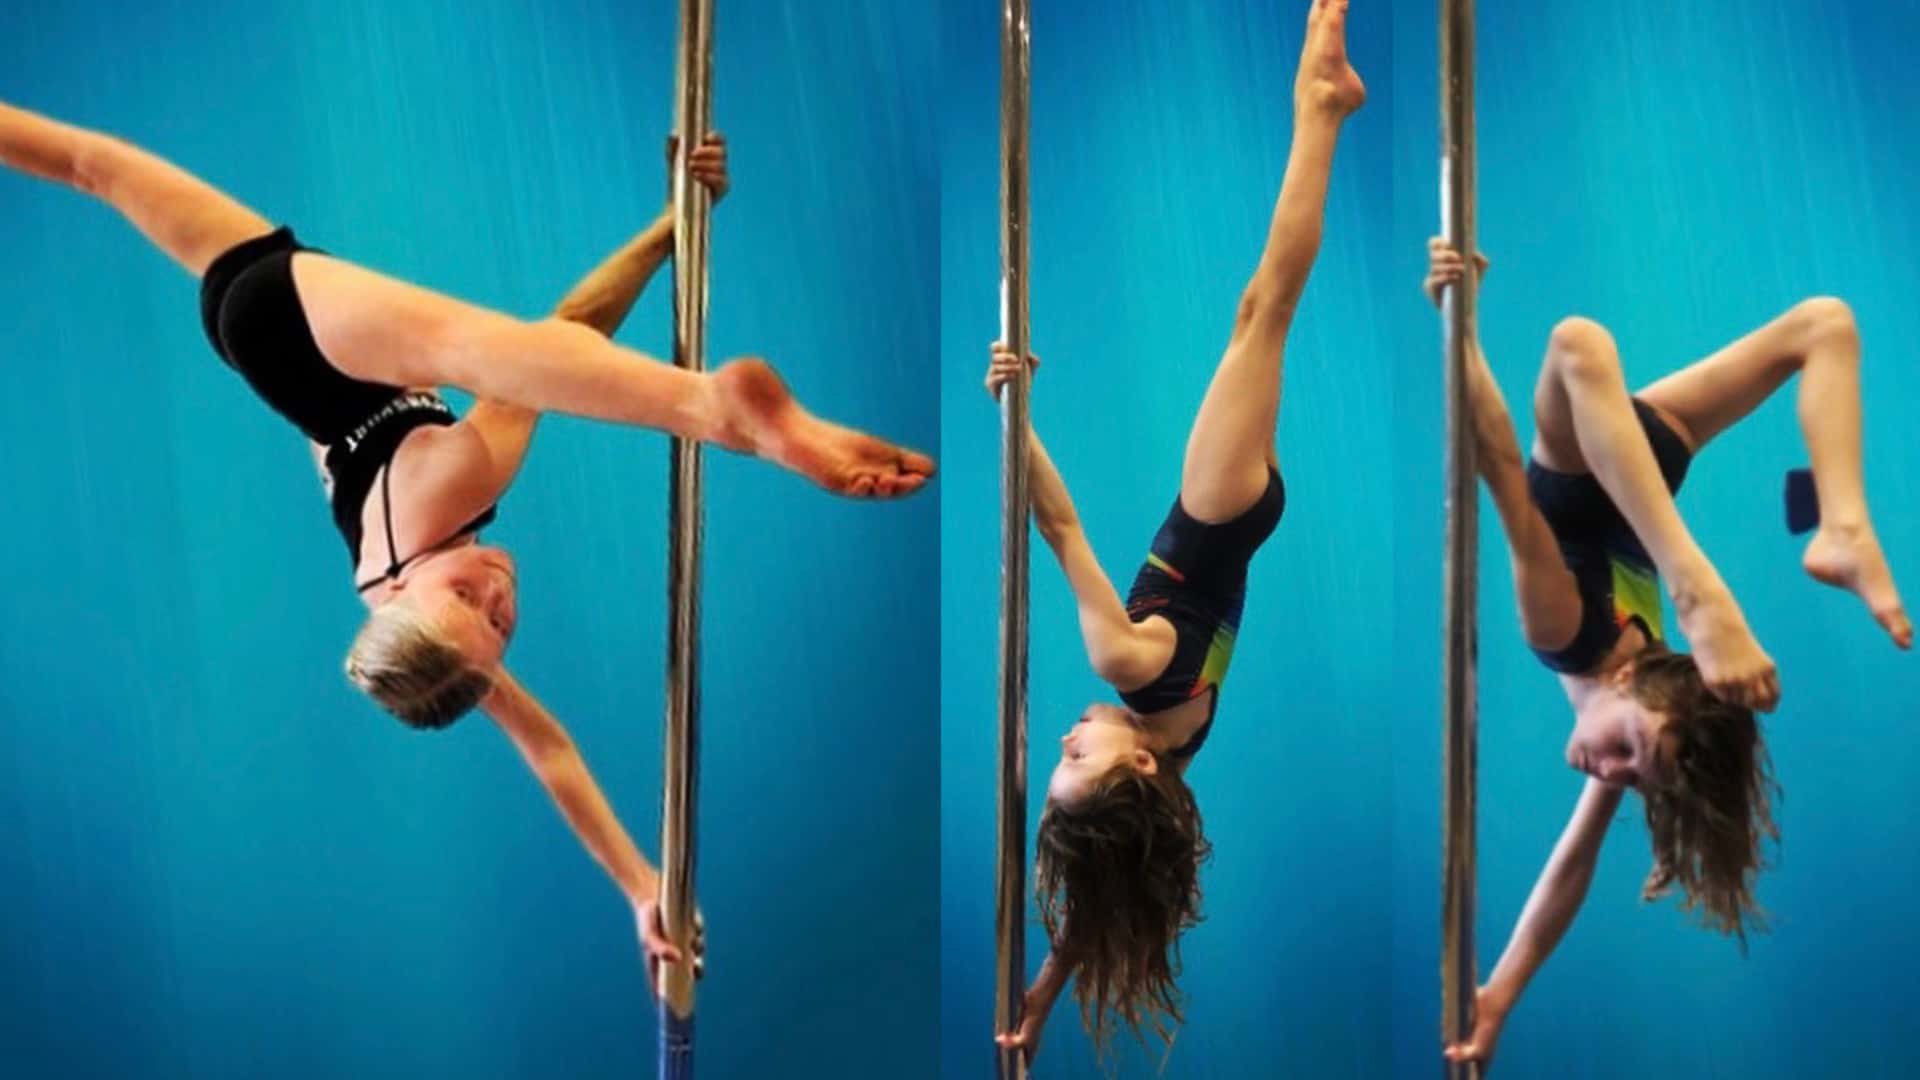 Annika and tabs on the pole